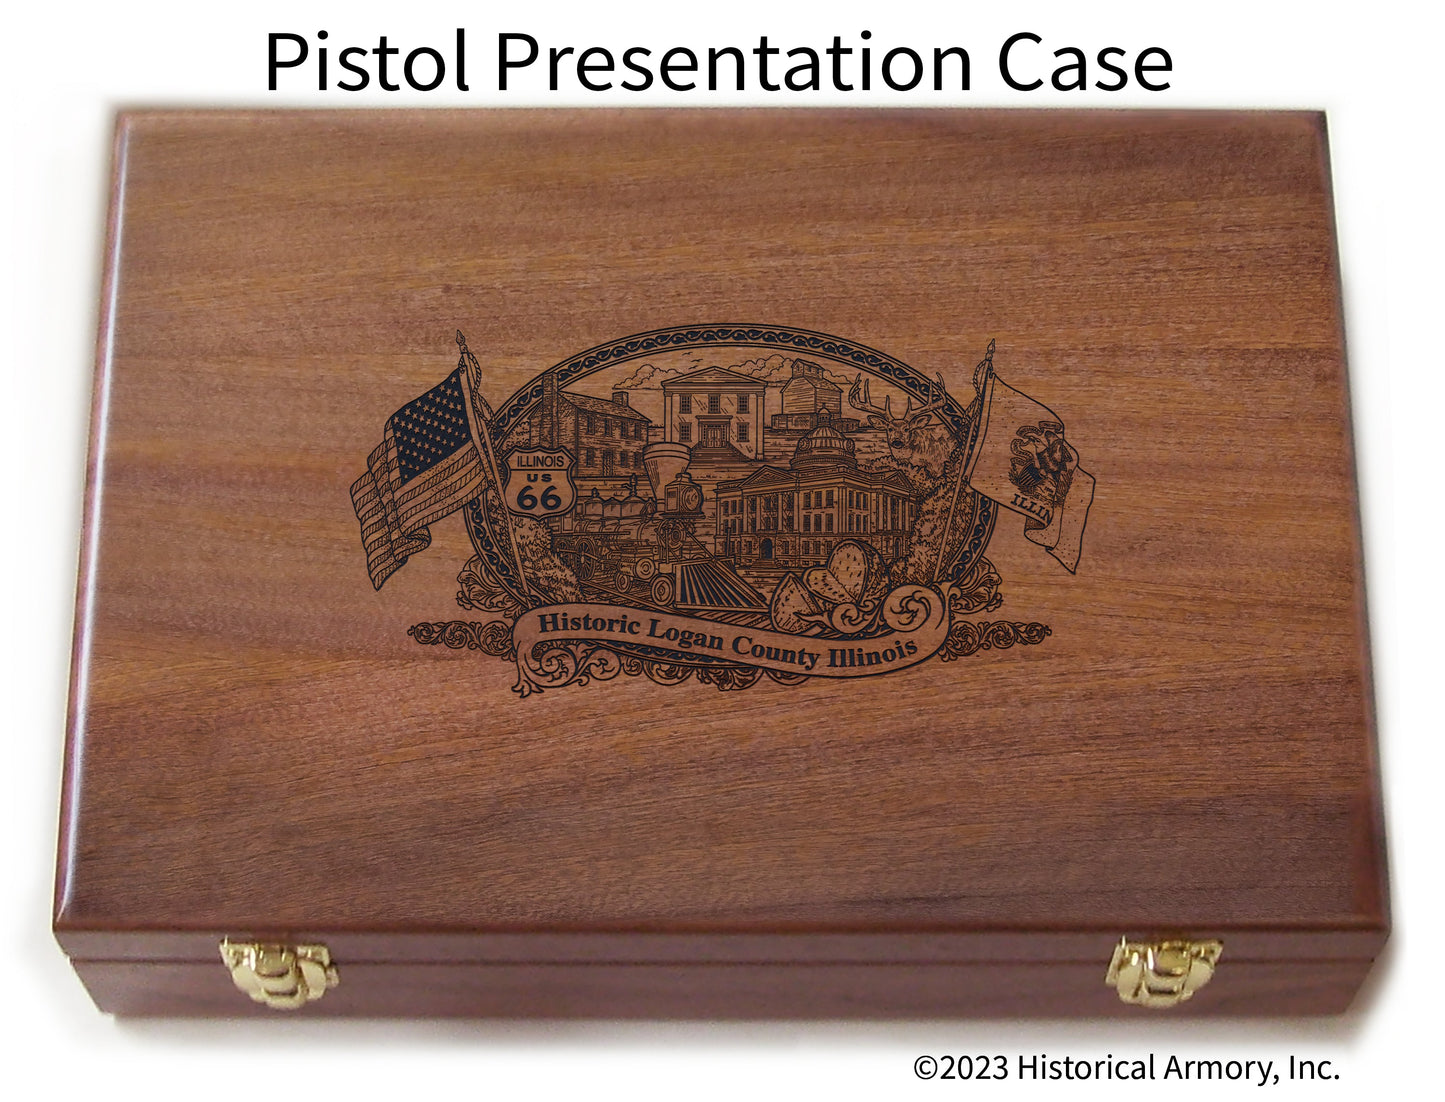 Logan County Illinois Engraved .45 Auto Ruger 1911 Presentation Case